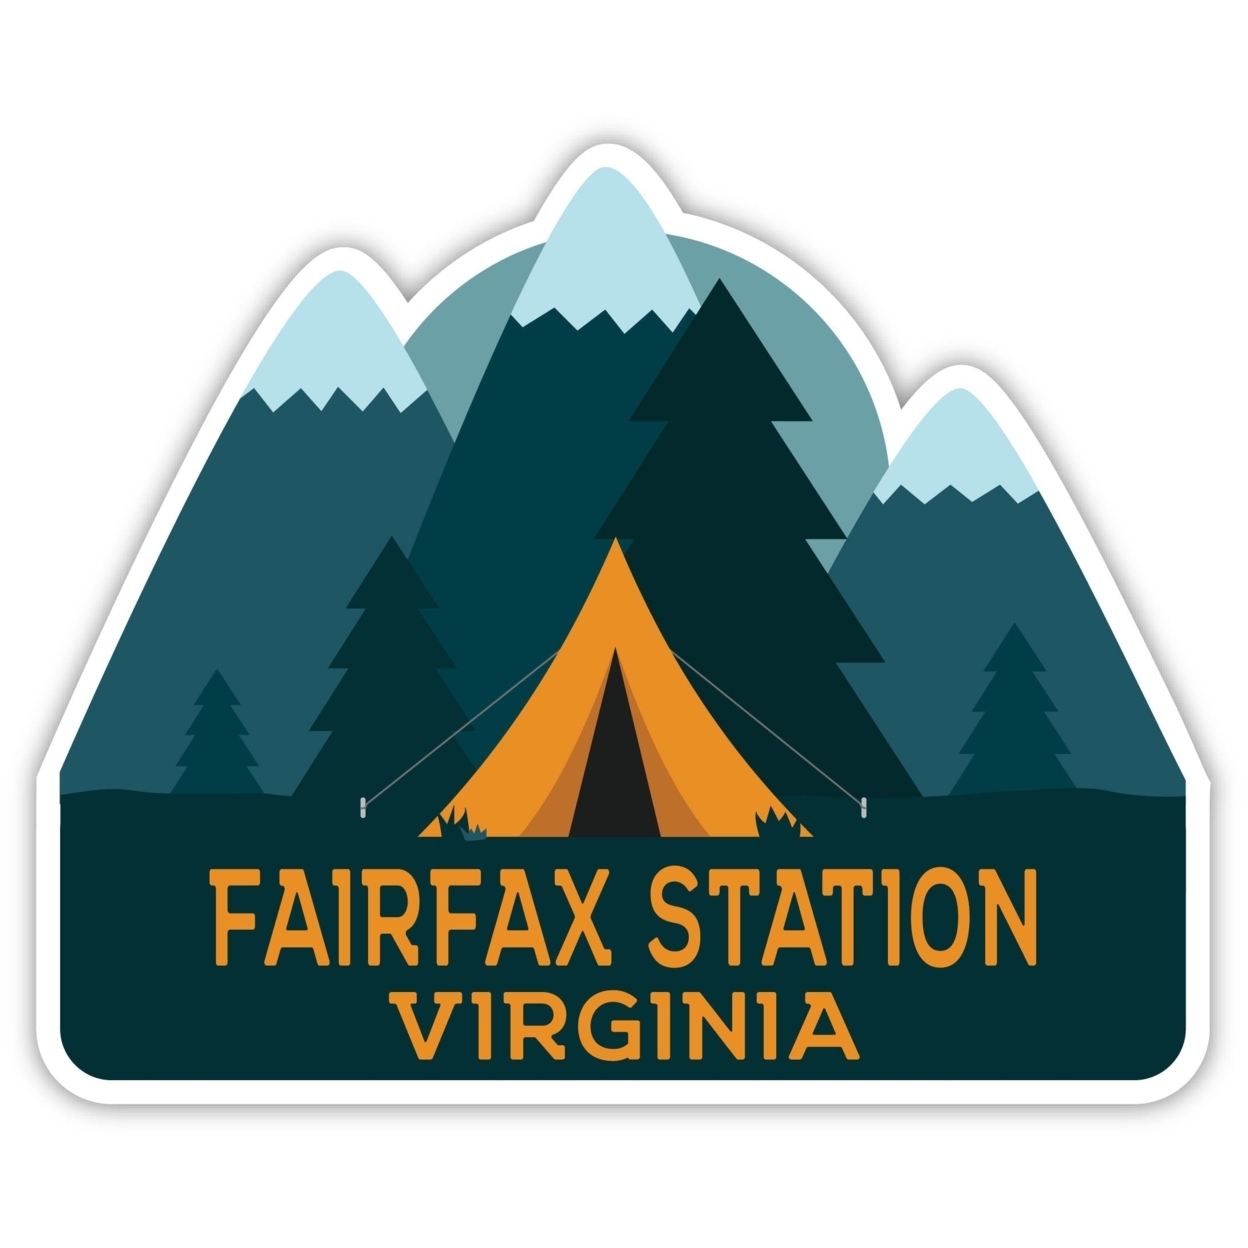 Fairfax Station Virginia Souvenir Decorative Stickers (Choose Theme And Size) - 4-Pack, 2-Inch, Tent